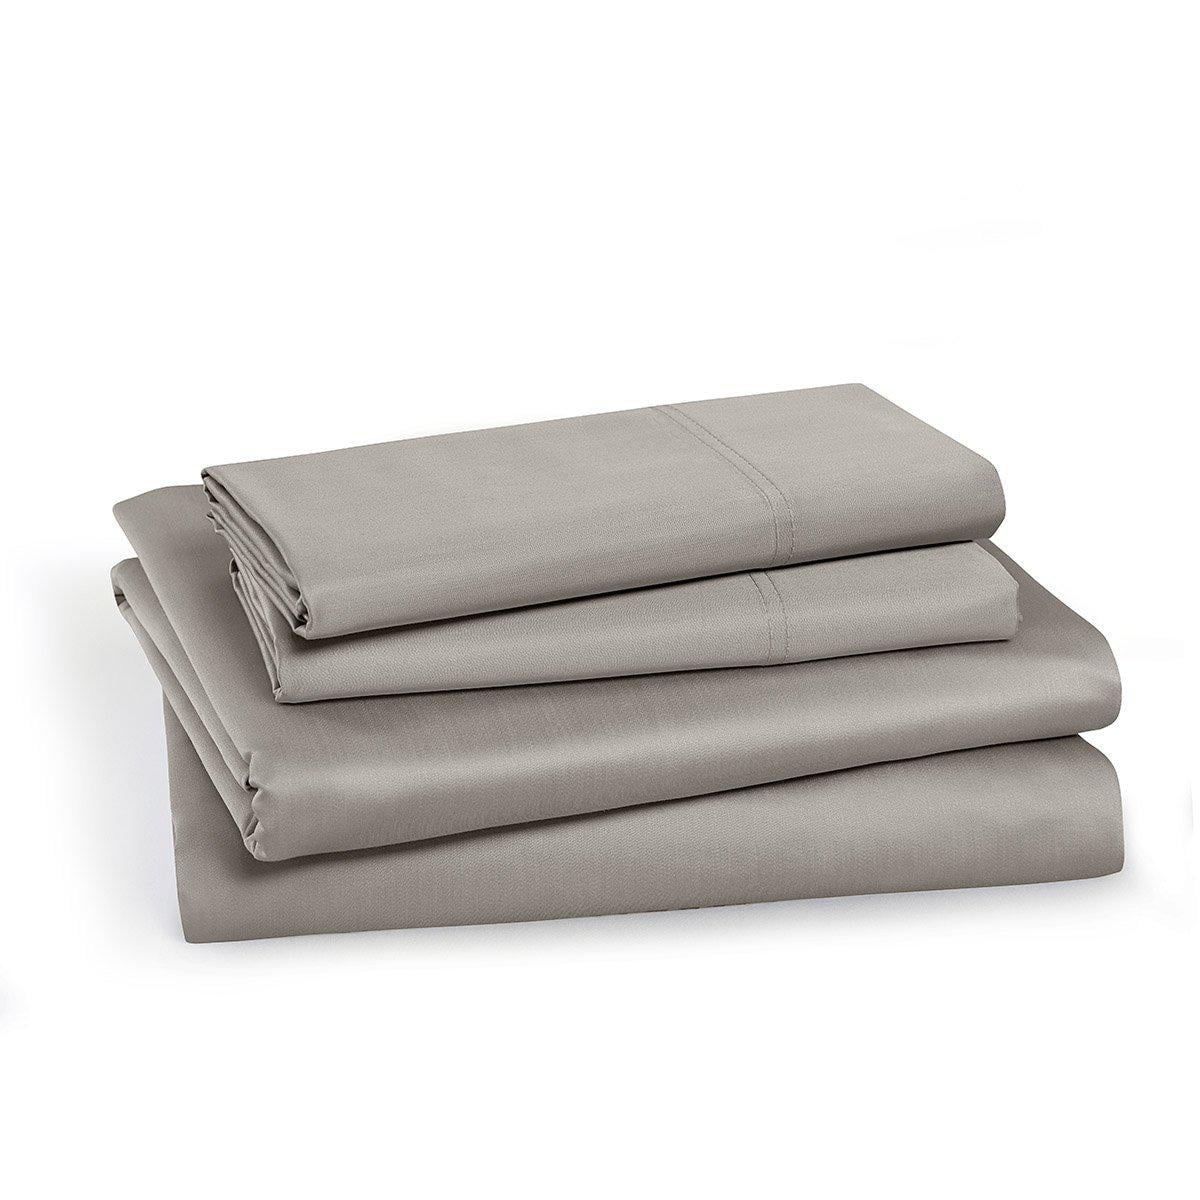 Soft 100 Cotton Percale Sheet Sets Deep pockets Made in Egypt Sheets Twin XL Gray Walmart